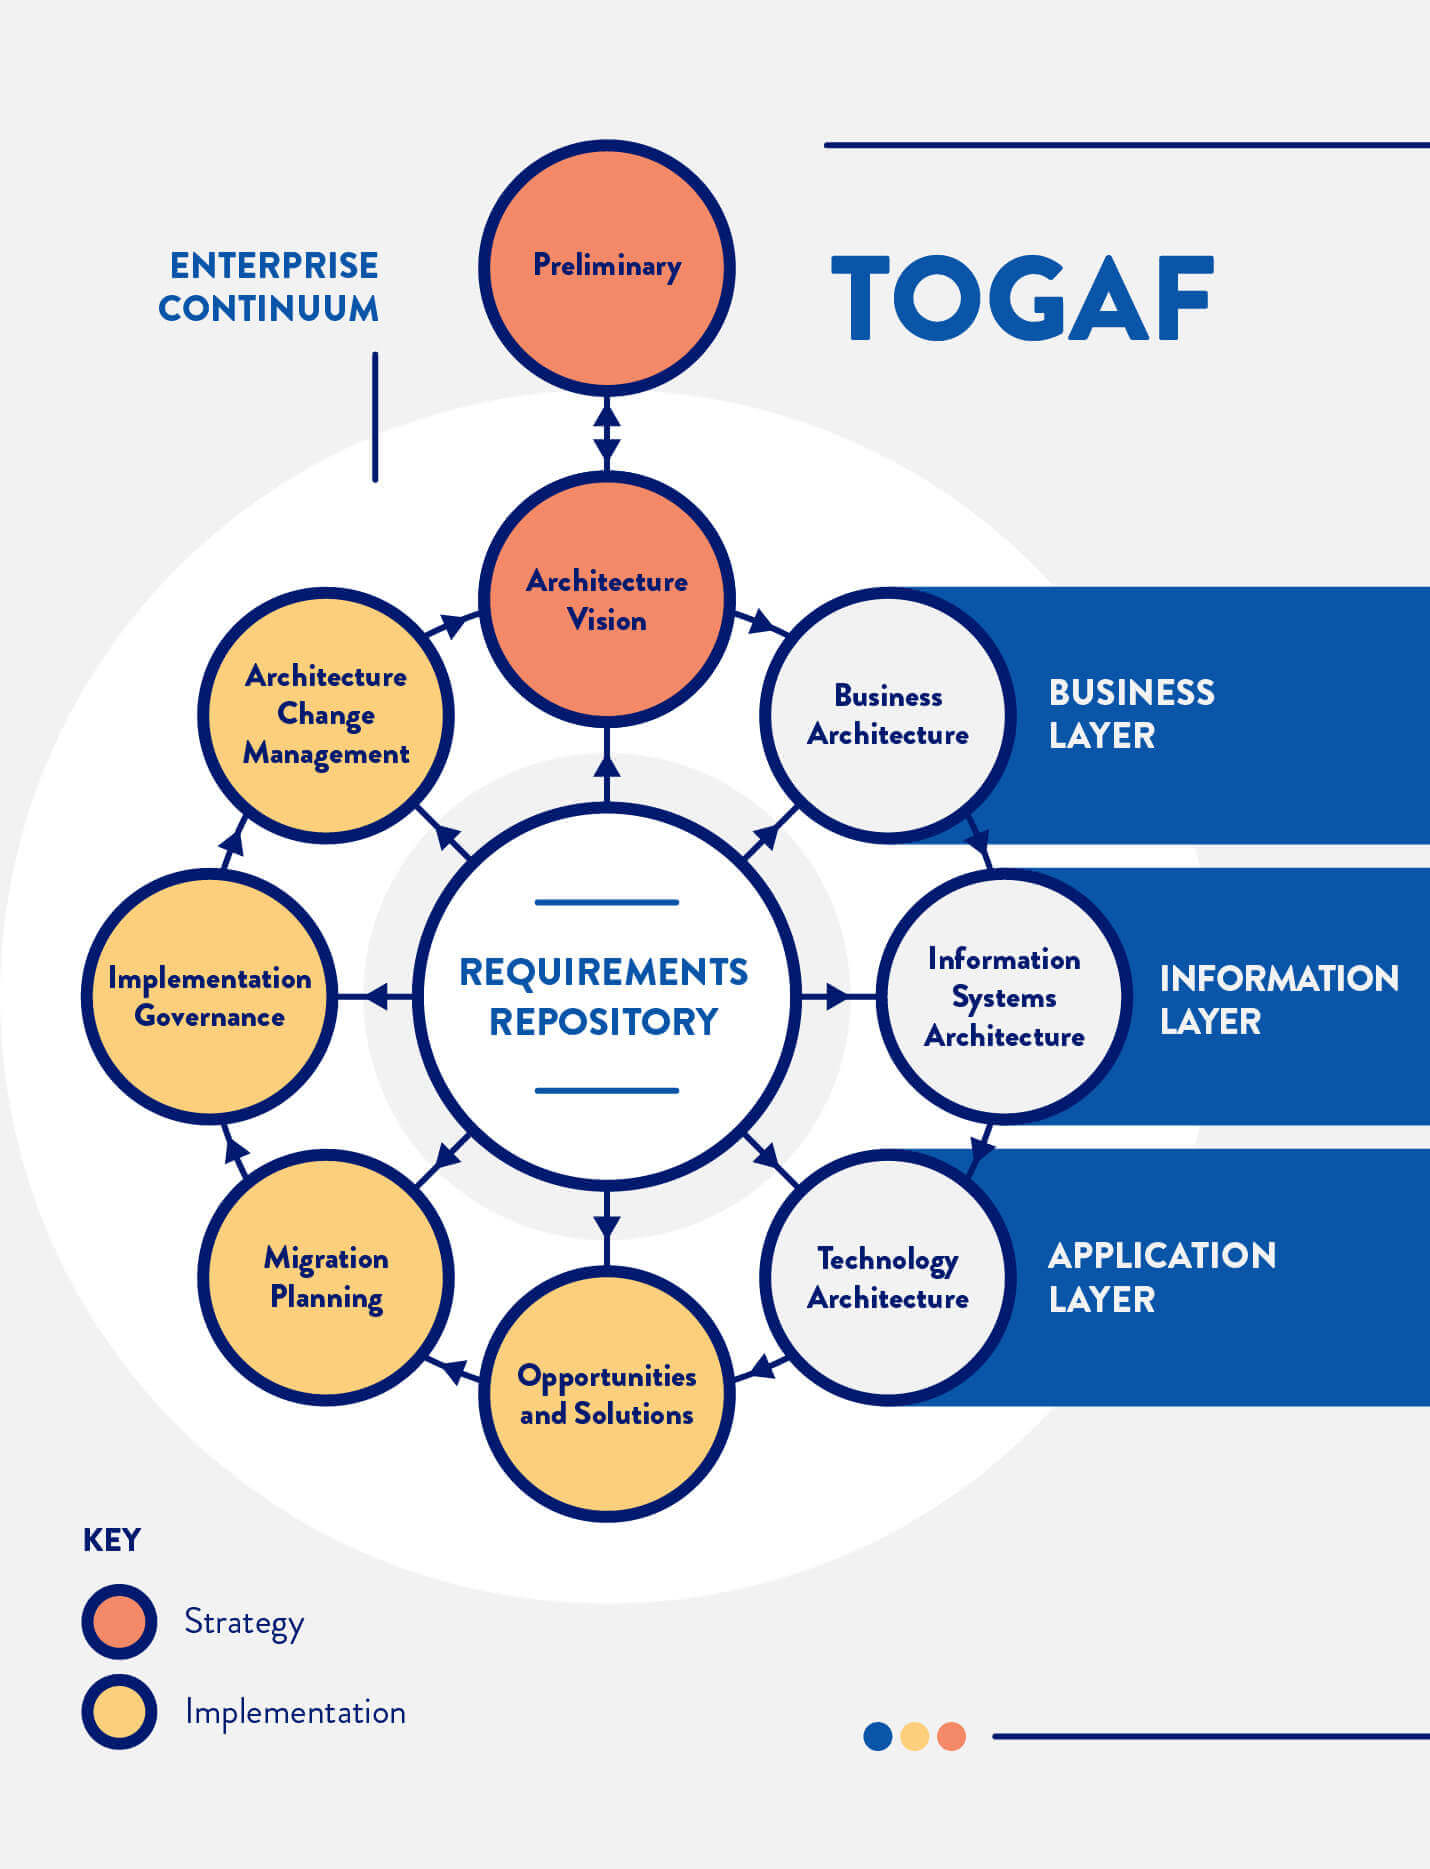 Togaf enterprise continuum for enterprise architects to plan and iterate